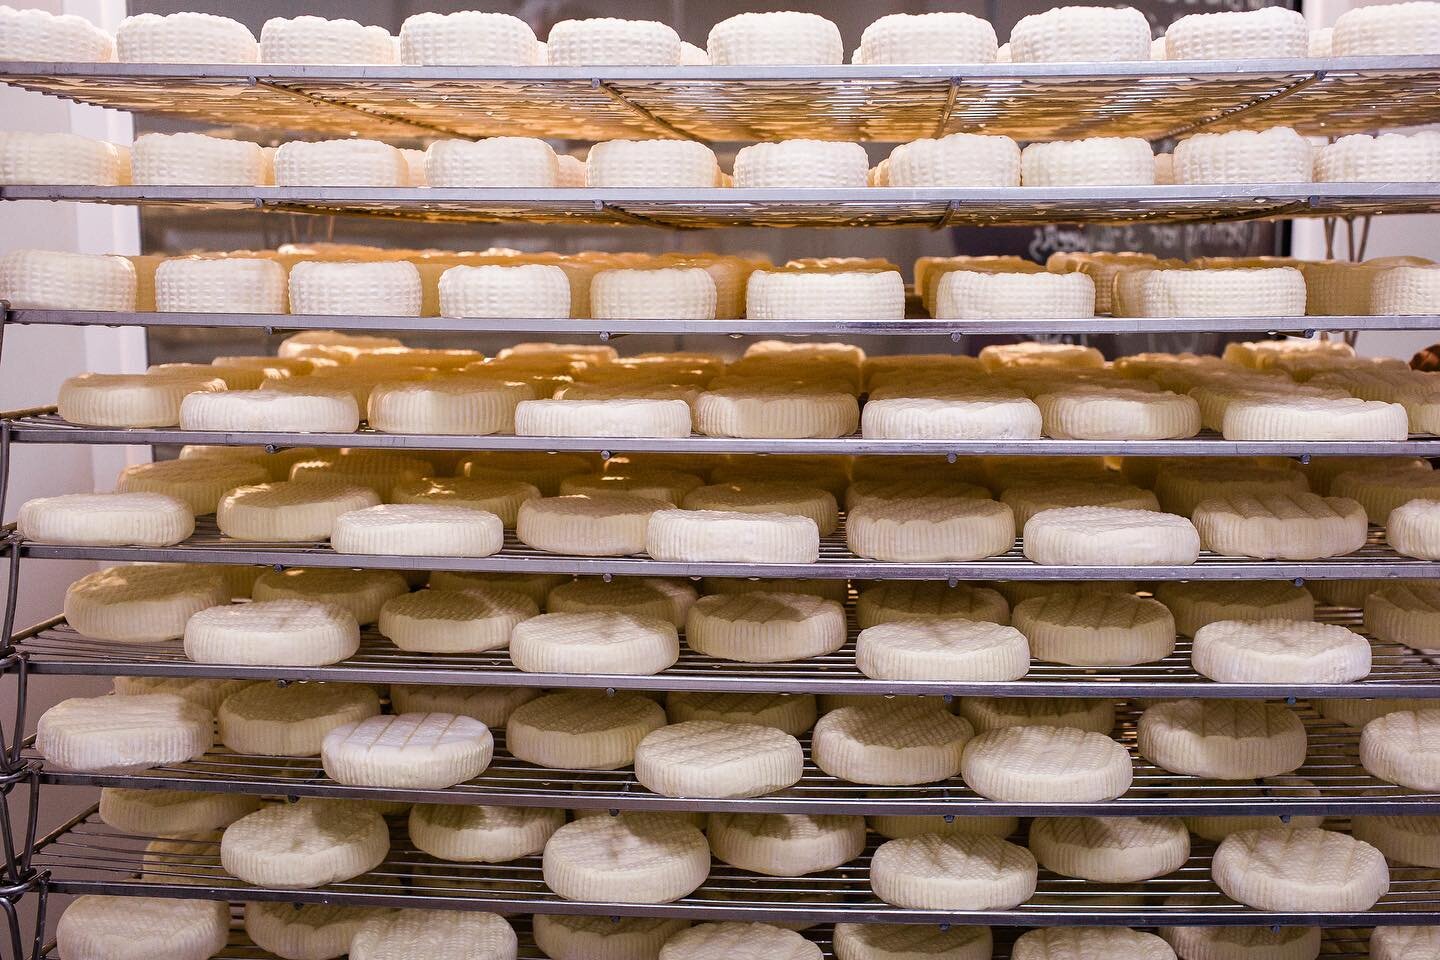 Cheesy goodness. These little guys are almost ready for packaging and hitting the shelves at @coolamoncheese. 

You can watch cheese being made through the viewing windows in the factory. 👀🧀

#canolatrail #coolamoncheese #cheesefactory #visitriveri